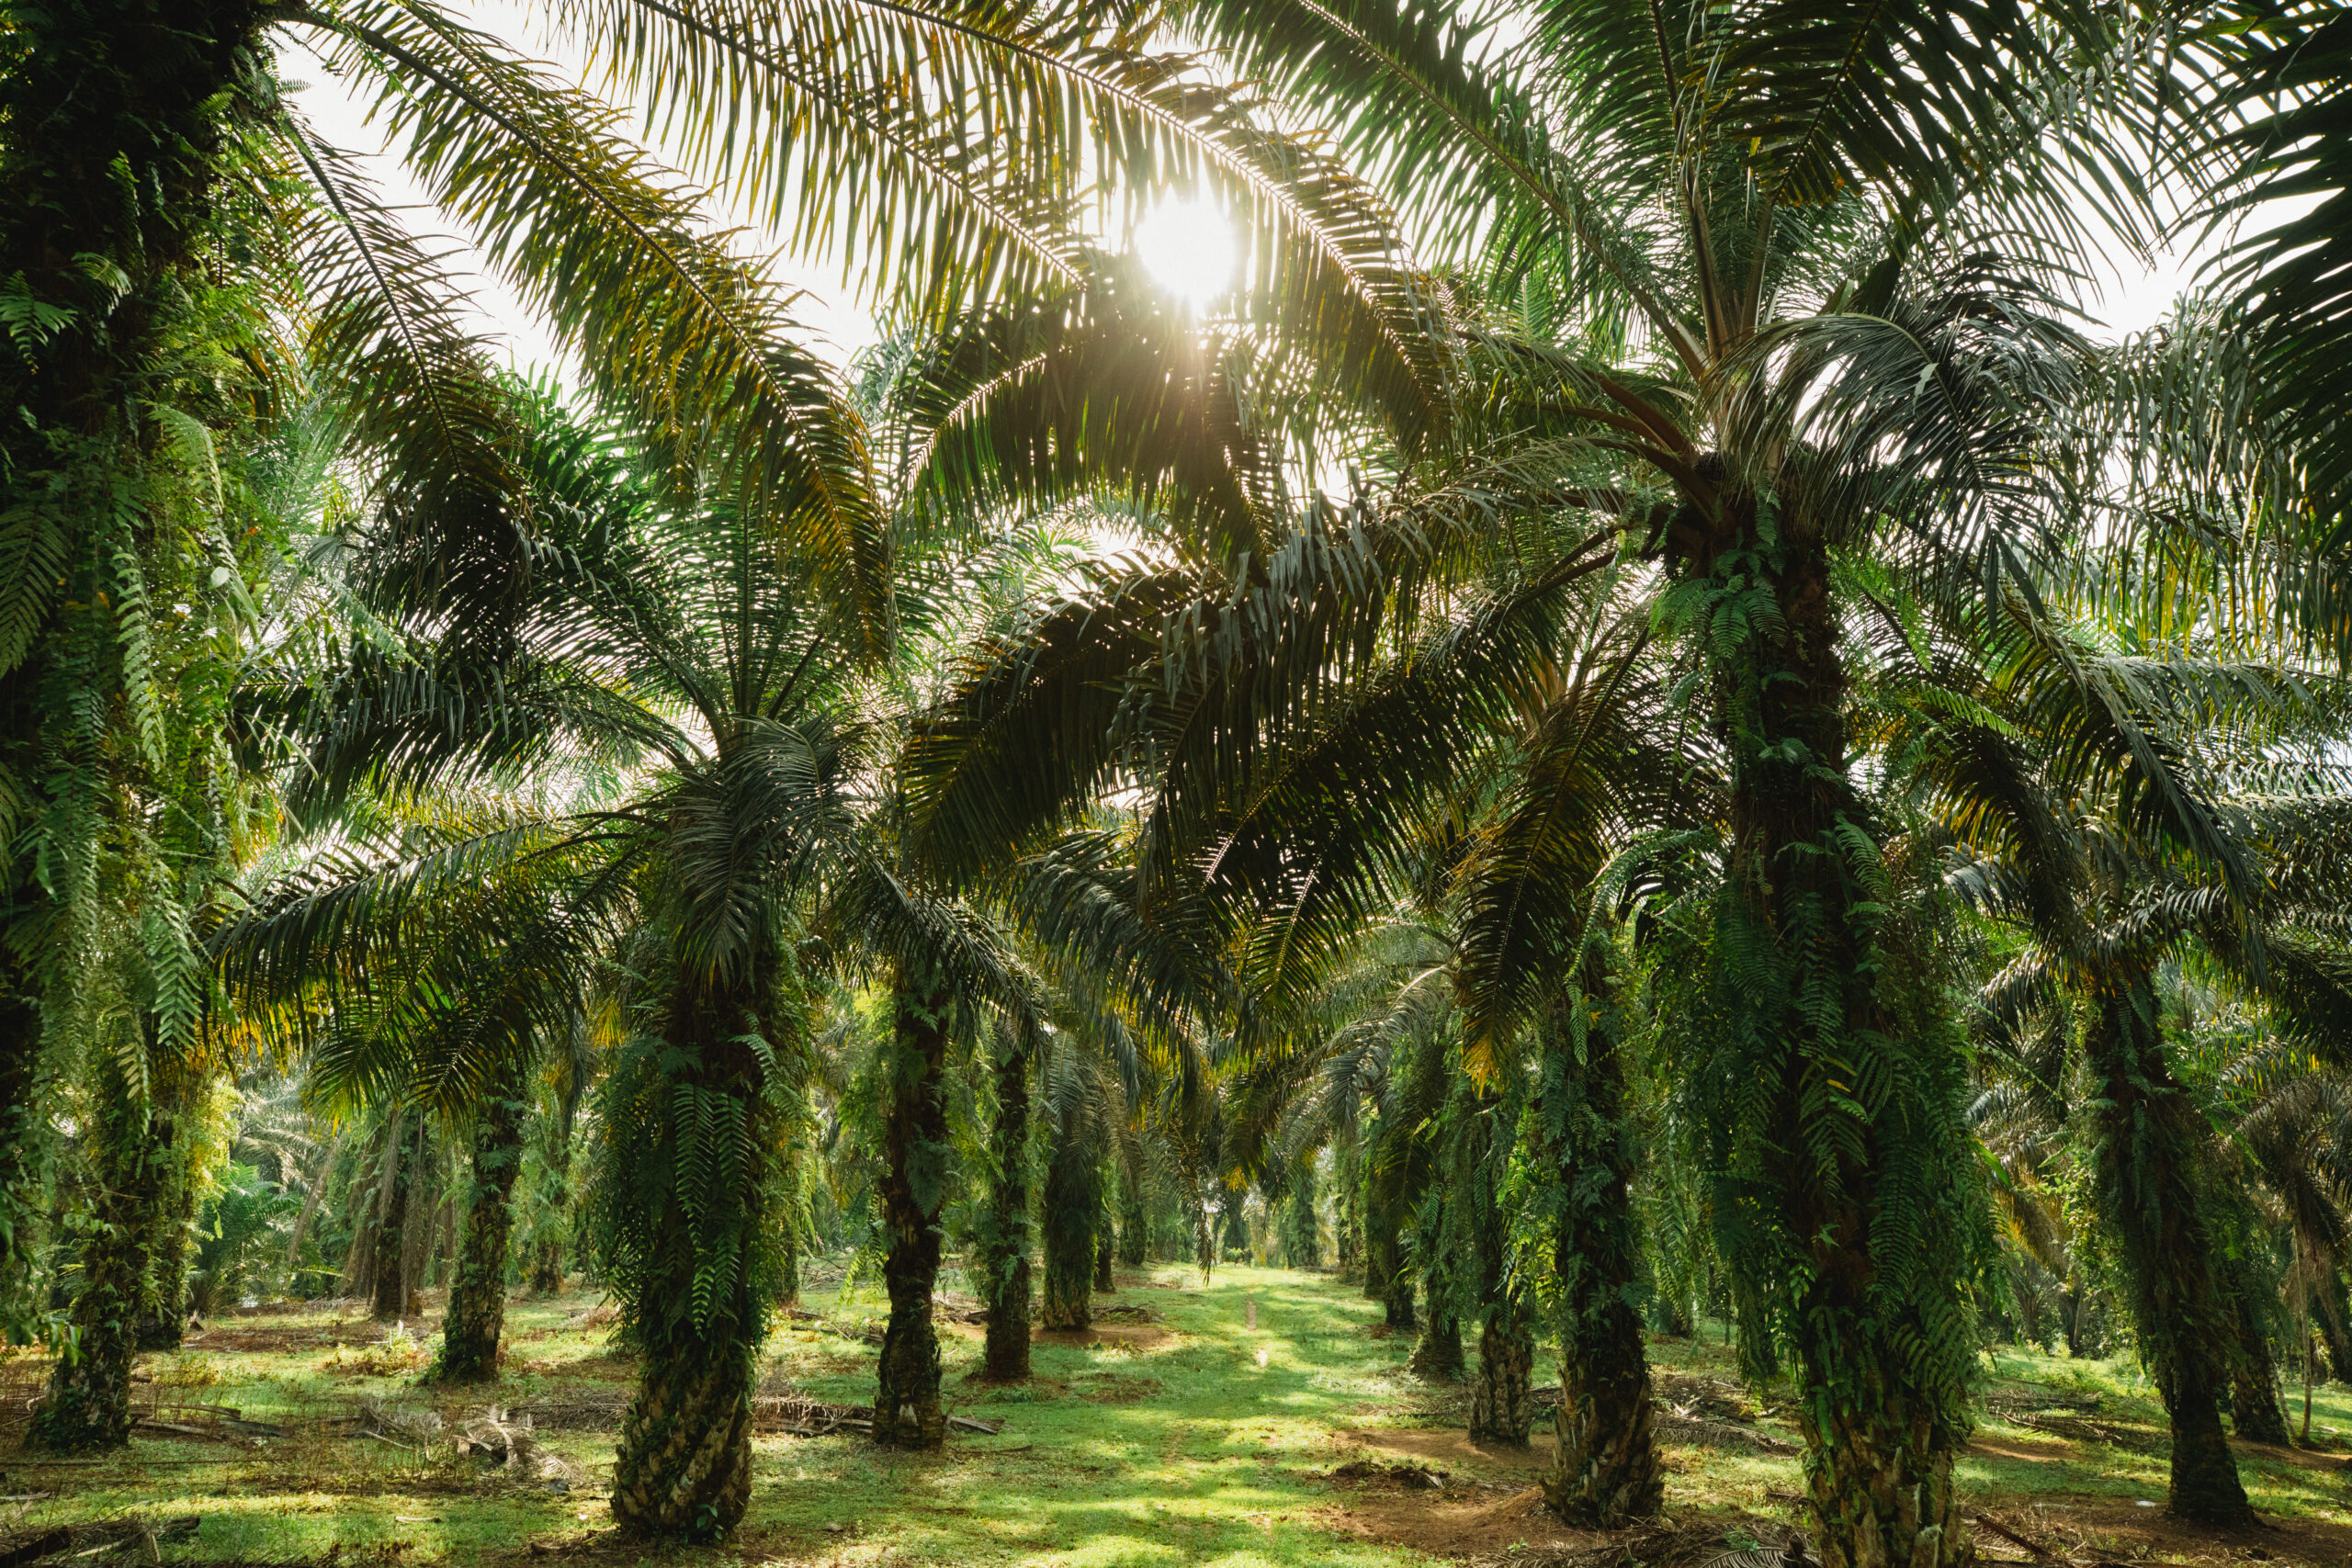 3 myths and misconceptions about palm oil - Musim Mas